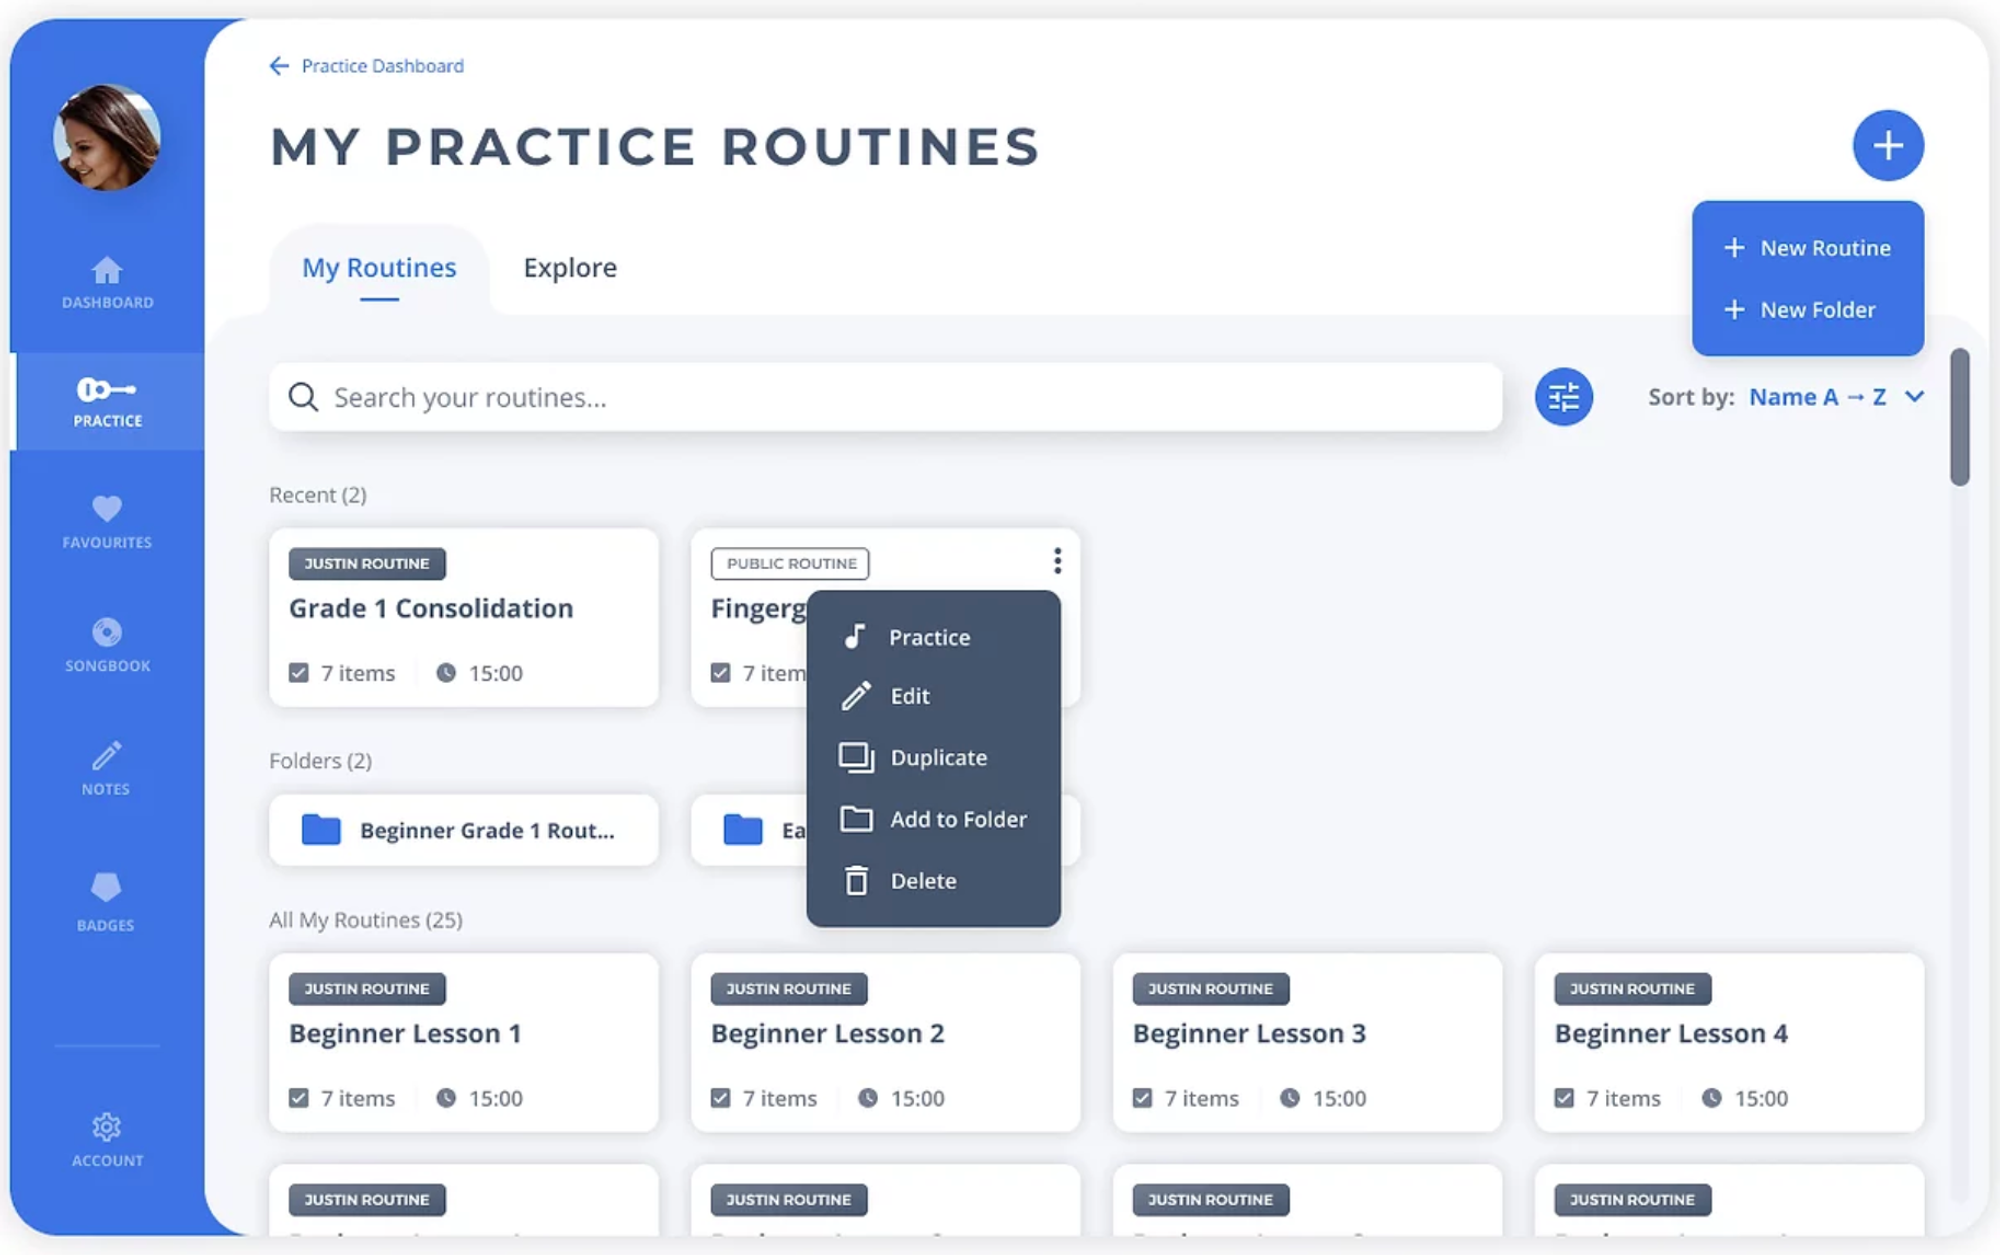 Figure 13: A high fidelity mock-up of the new Justin Guitar practice assistant tool. The tool can be found on the user’s dashboard. The particular page shown is called “My Practice Routines”, which allows users to download or create practice routines and sort them into folders.